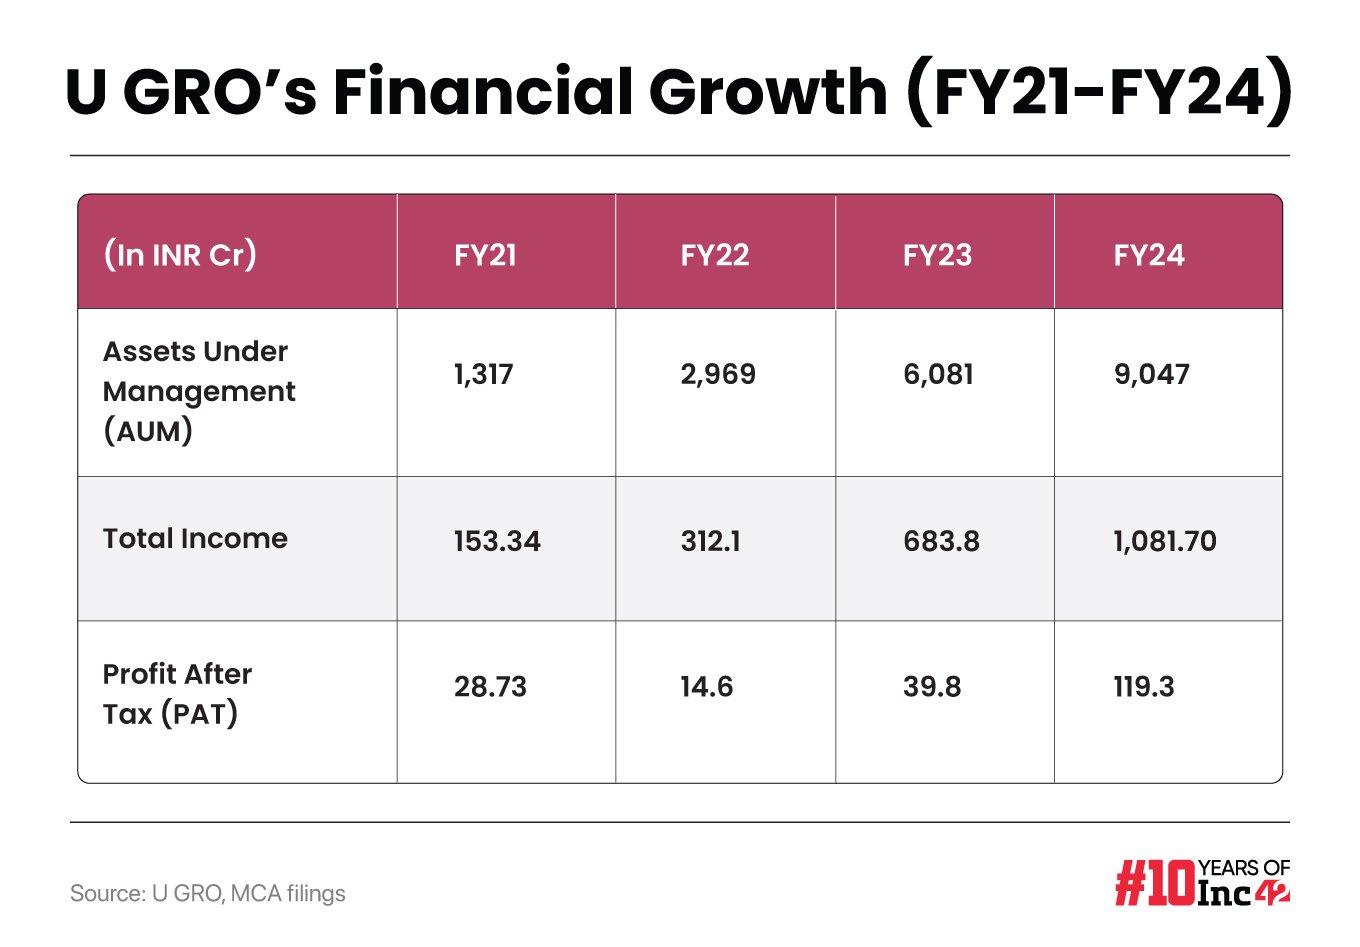 Set up in 2018 through the acquisition, recapitalisation and rebranding of the listed entity Chokhani Securities, U GRO took an unconventional route